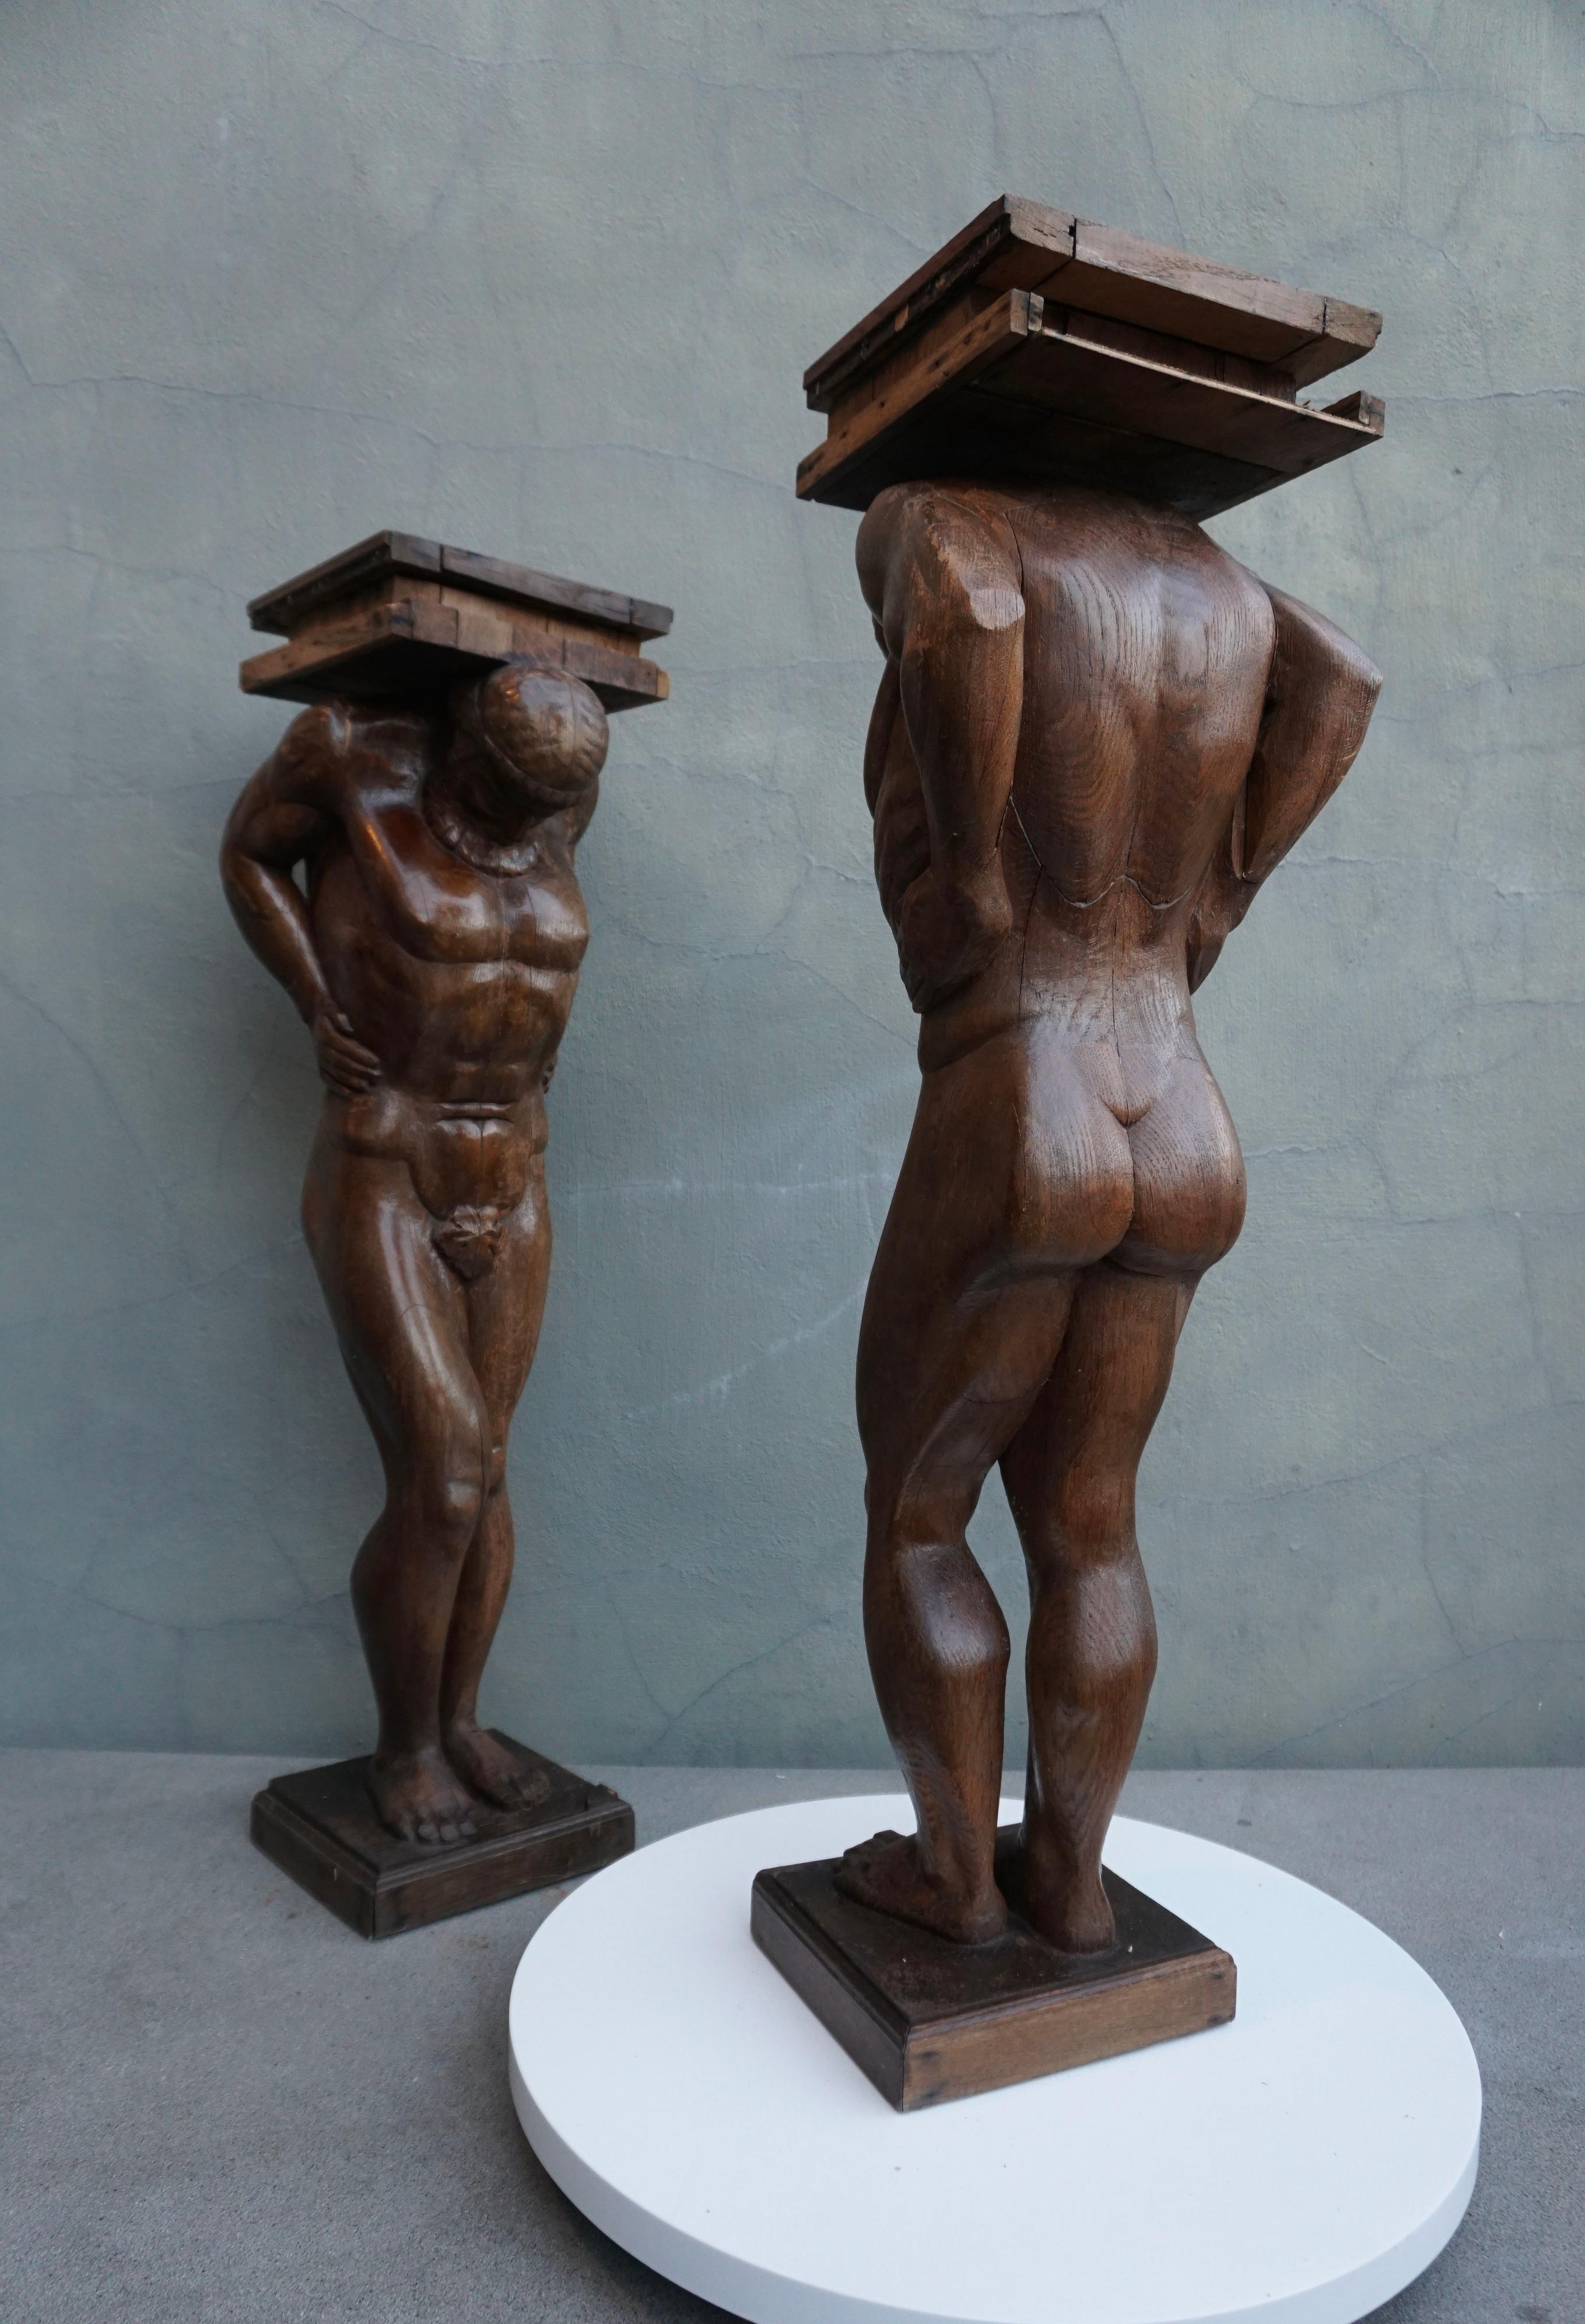 Two carved of oak columns or pedestals, each of a muscular male figure, representing Atlas or Hercules, the head inclined forward and supporting as well with the shoulders a square platform.

These stunning and beautifully crafted wooden sculptures